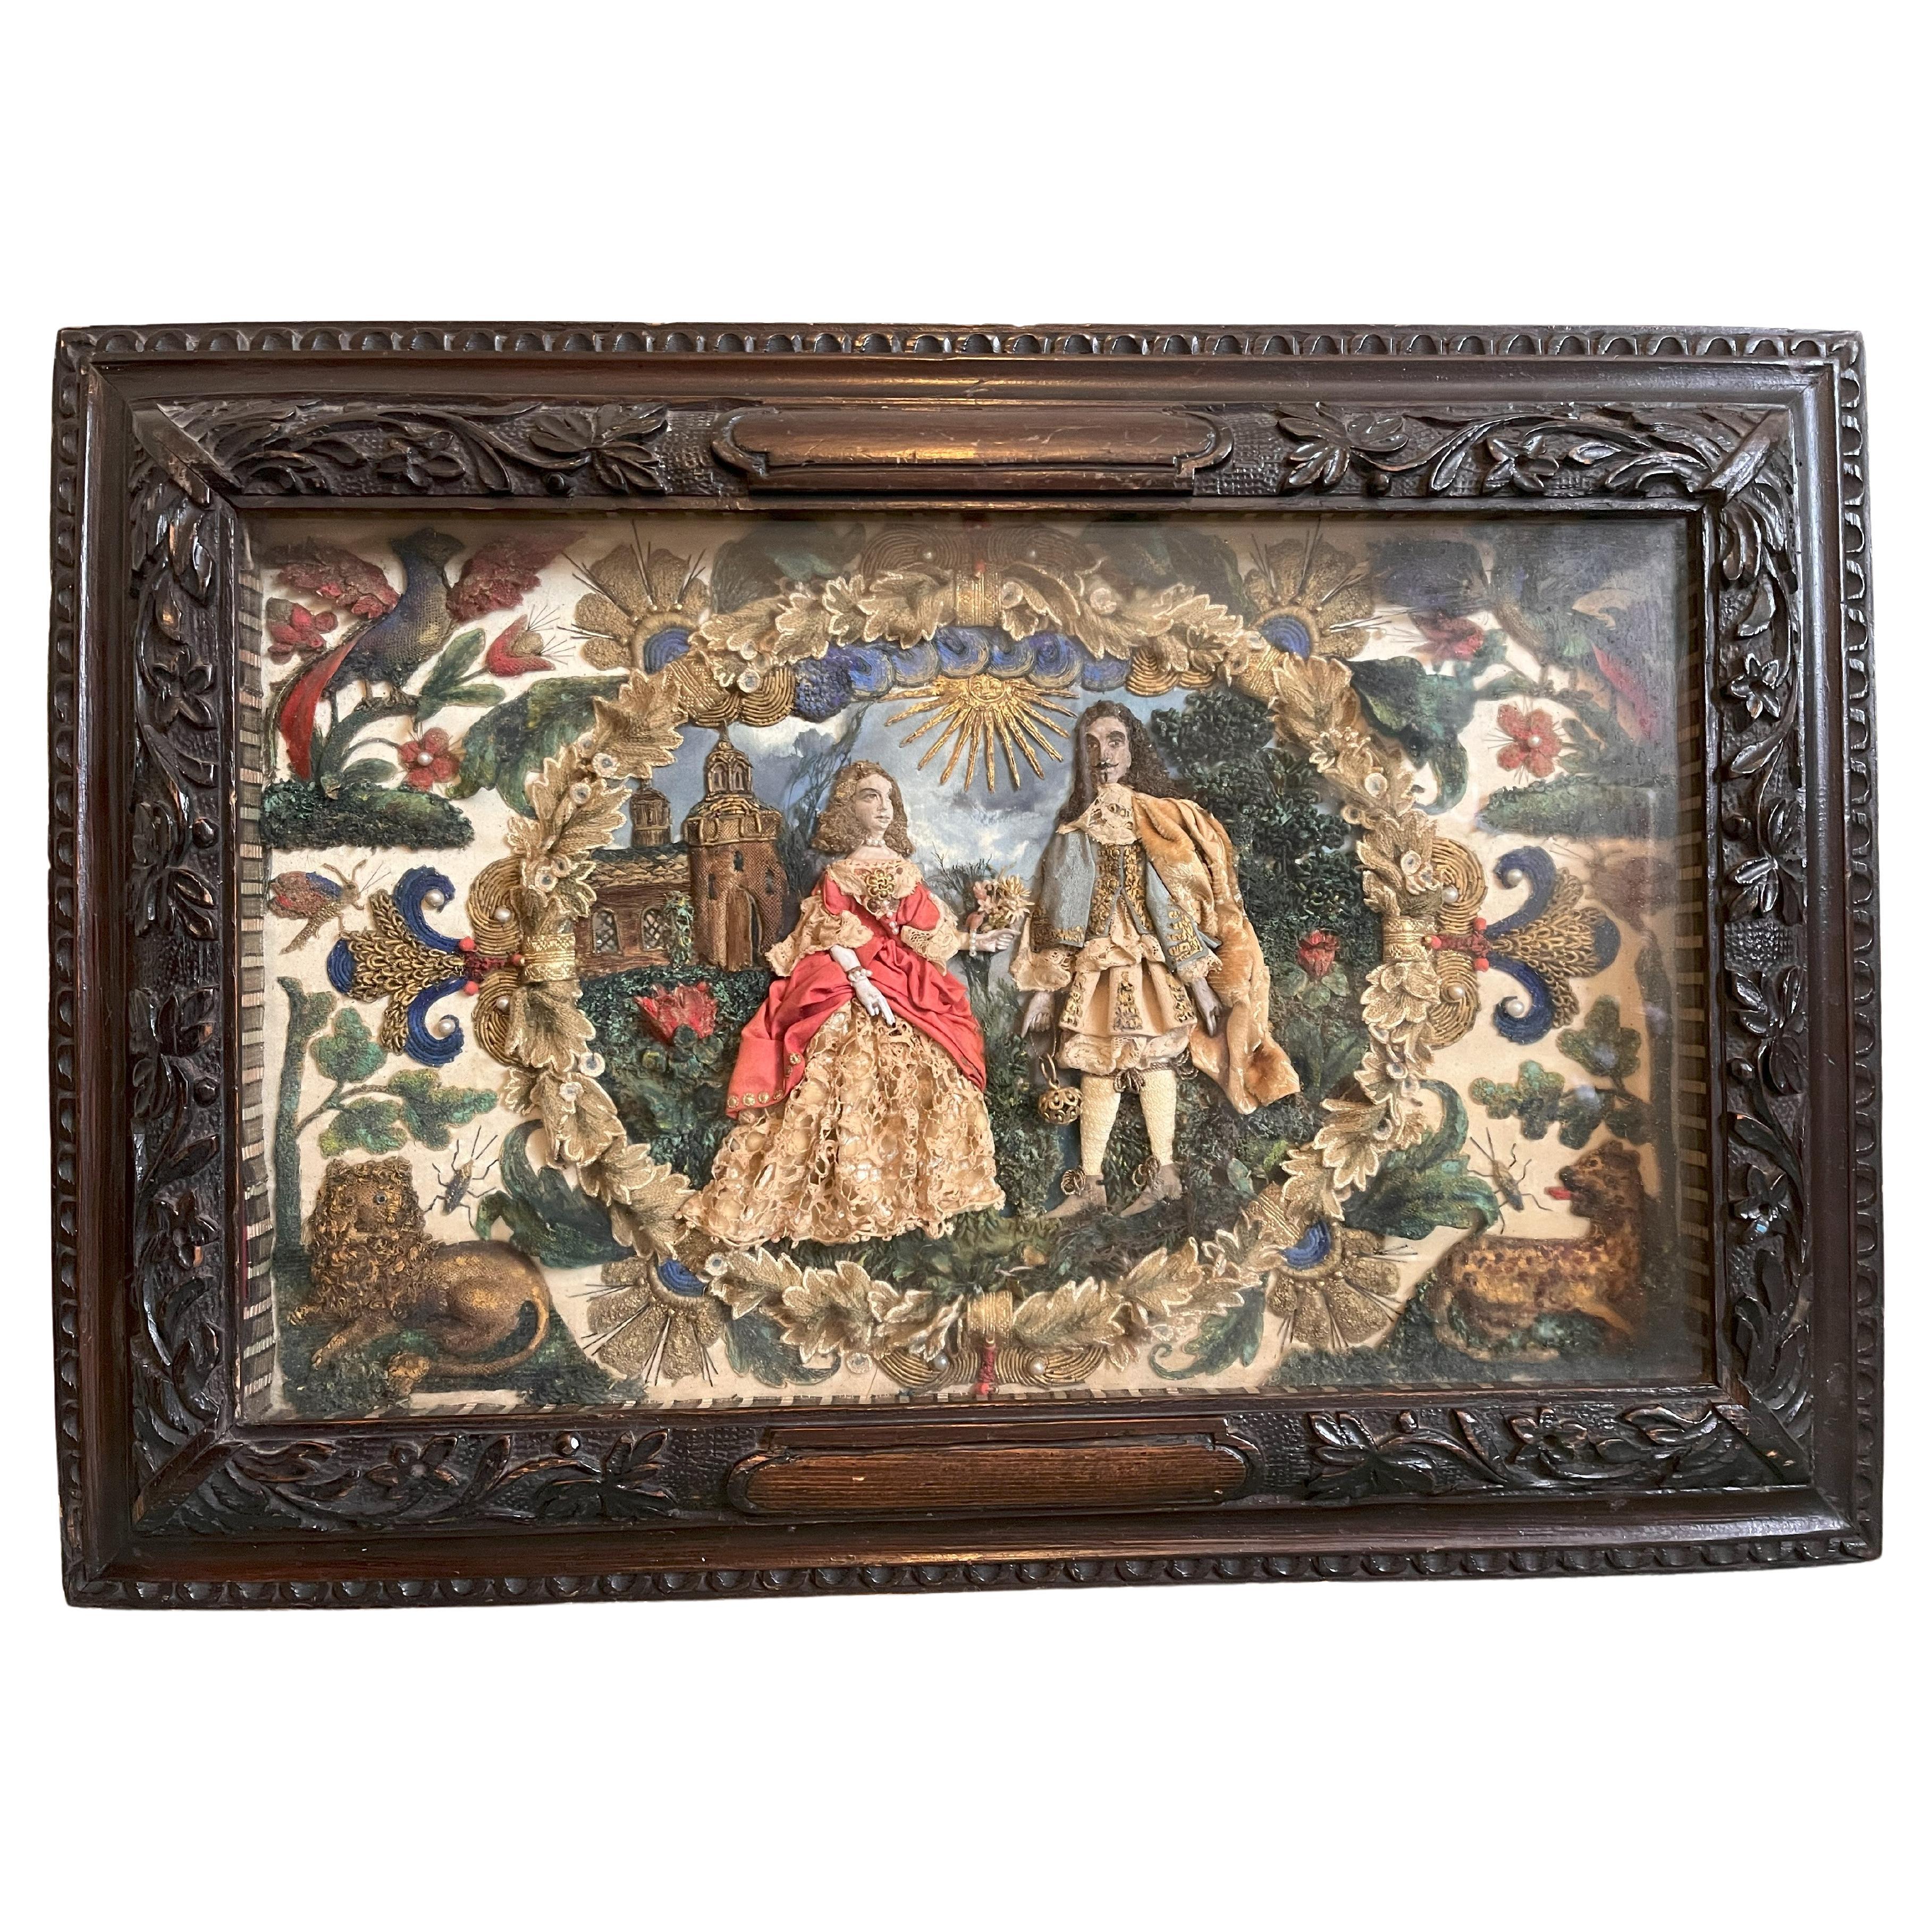 Ivory Stuart period Stump work panel - King Charles II and his favourite Lady For Sale